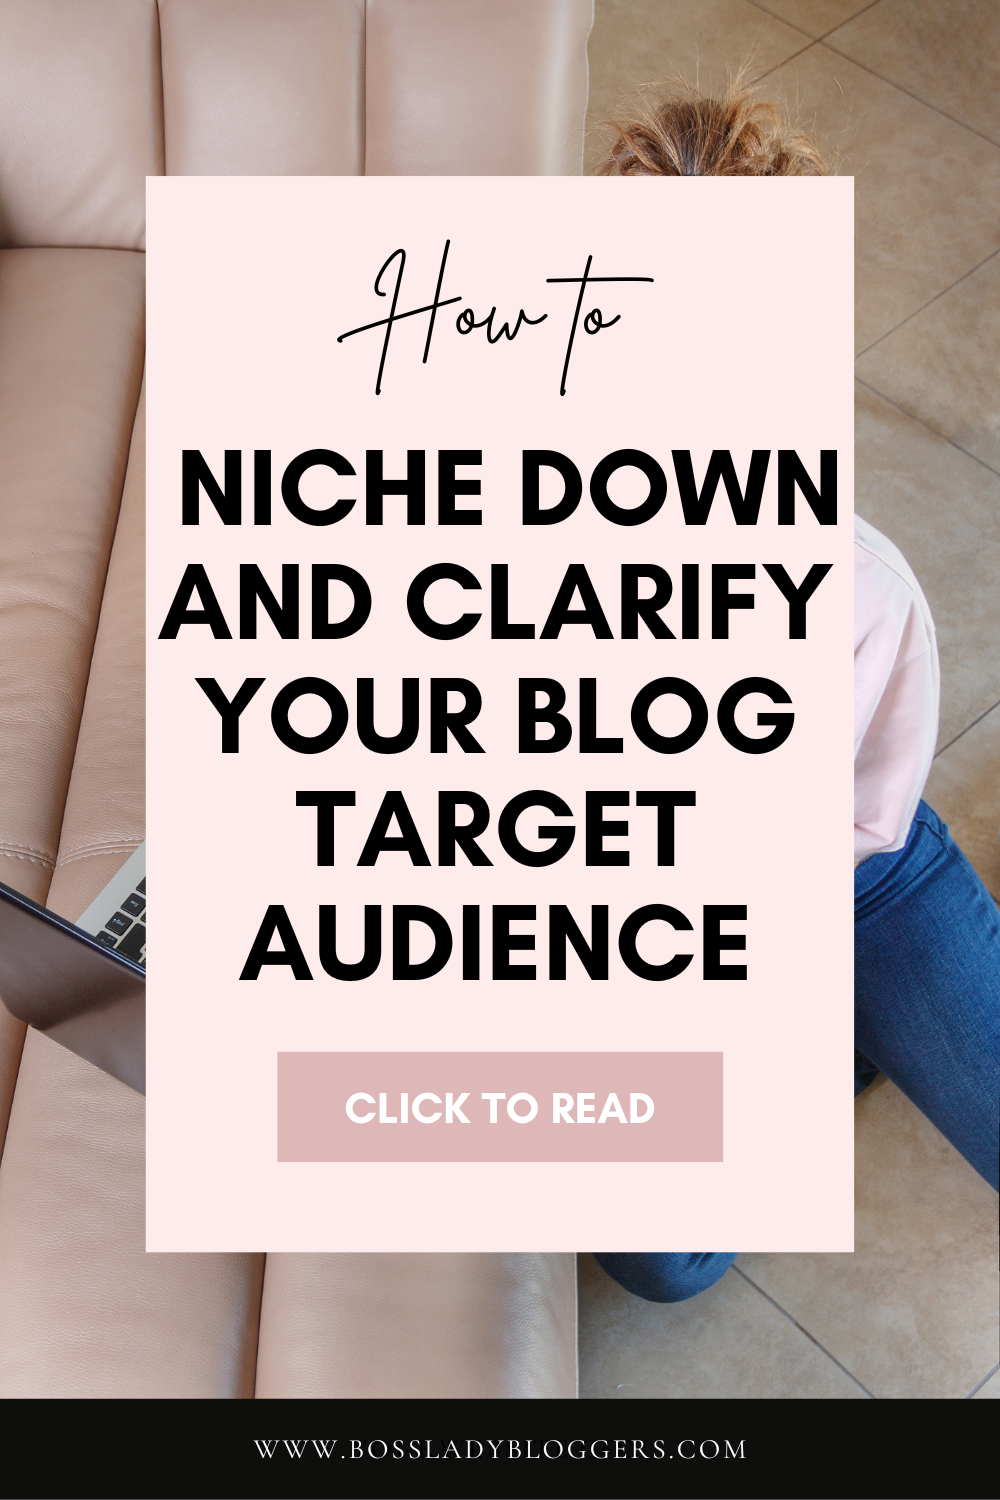 How to Niche Down and Clarify Your Blog Target Audience